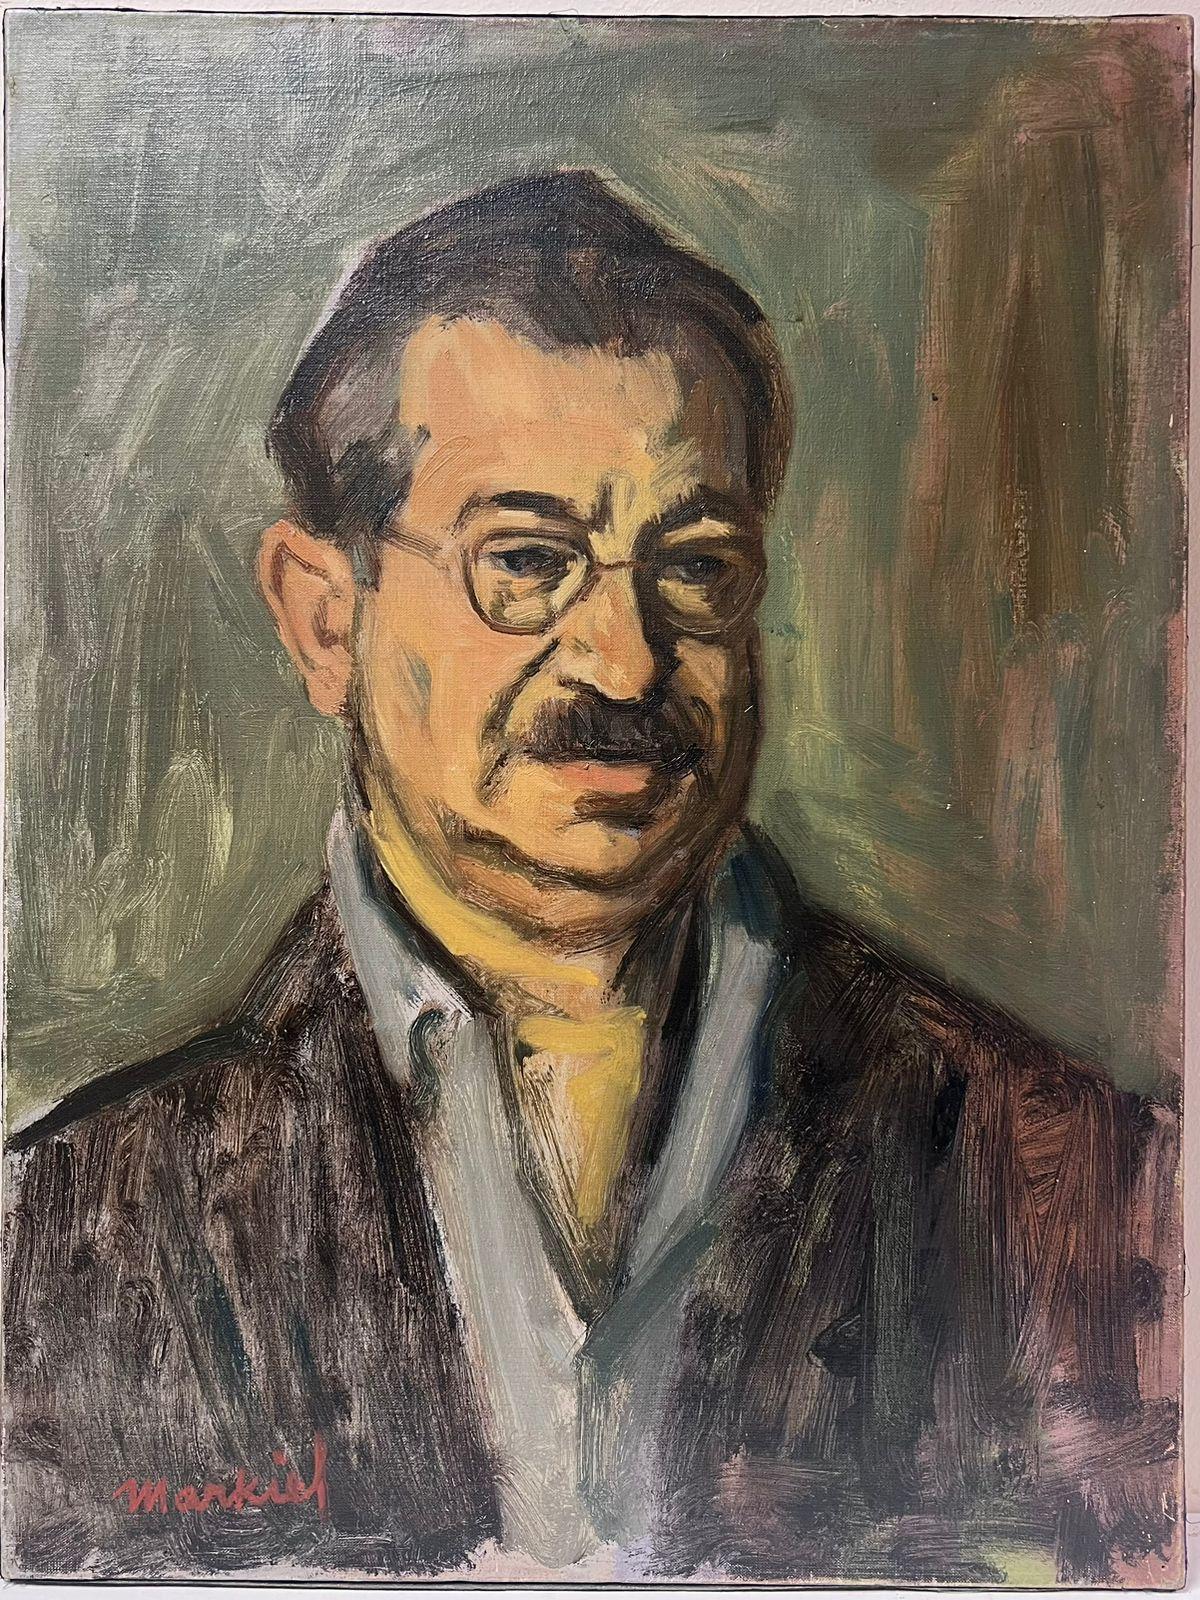 Jacob Markiel Figurative Painting - 20th Century Portrait of man with Glasses by listed Polish Artist Oil on Canvas